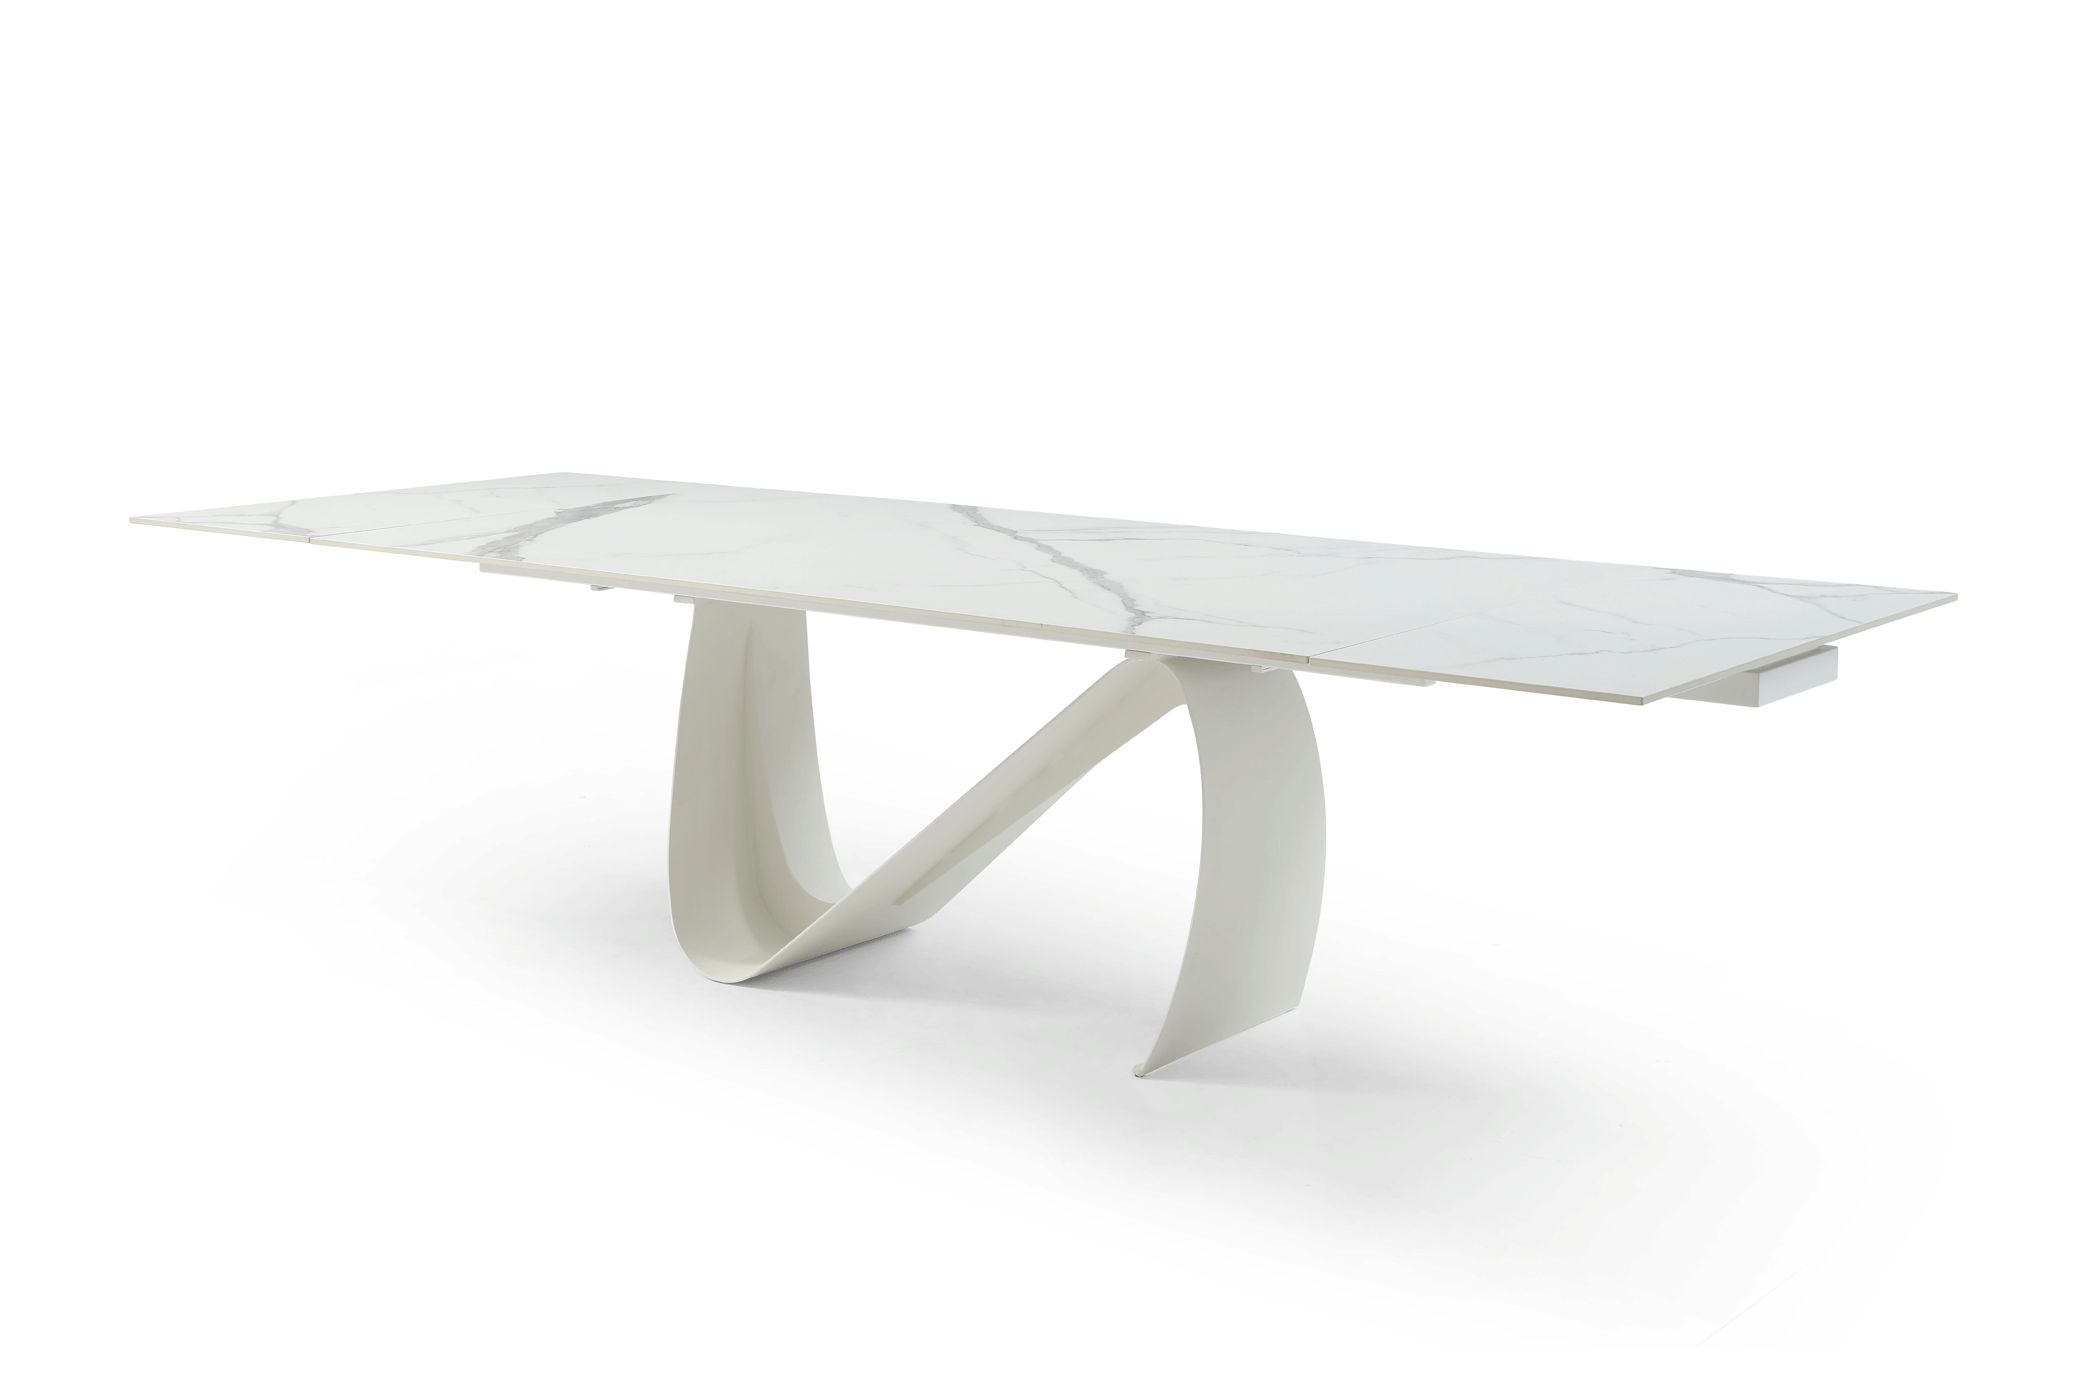 Brands Garcia Laurel & Hardy Tables 9087 Table White